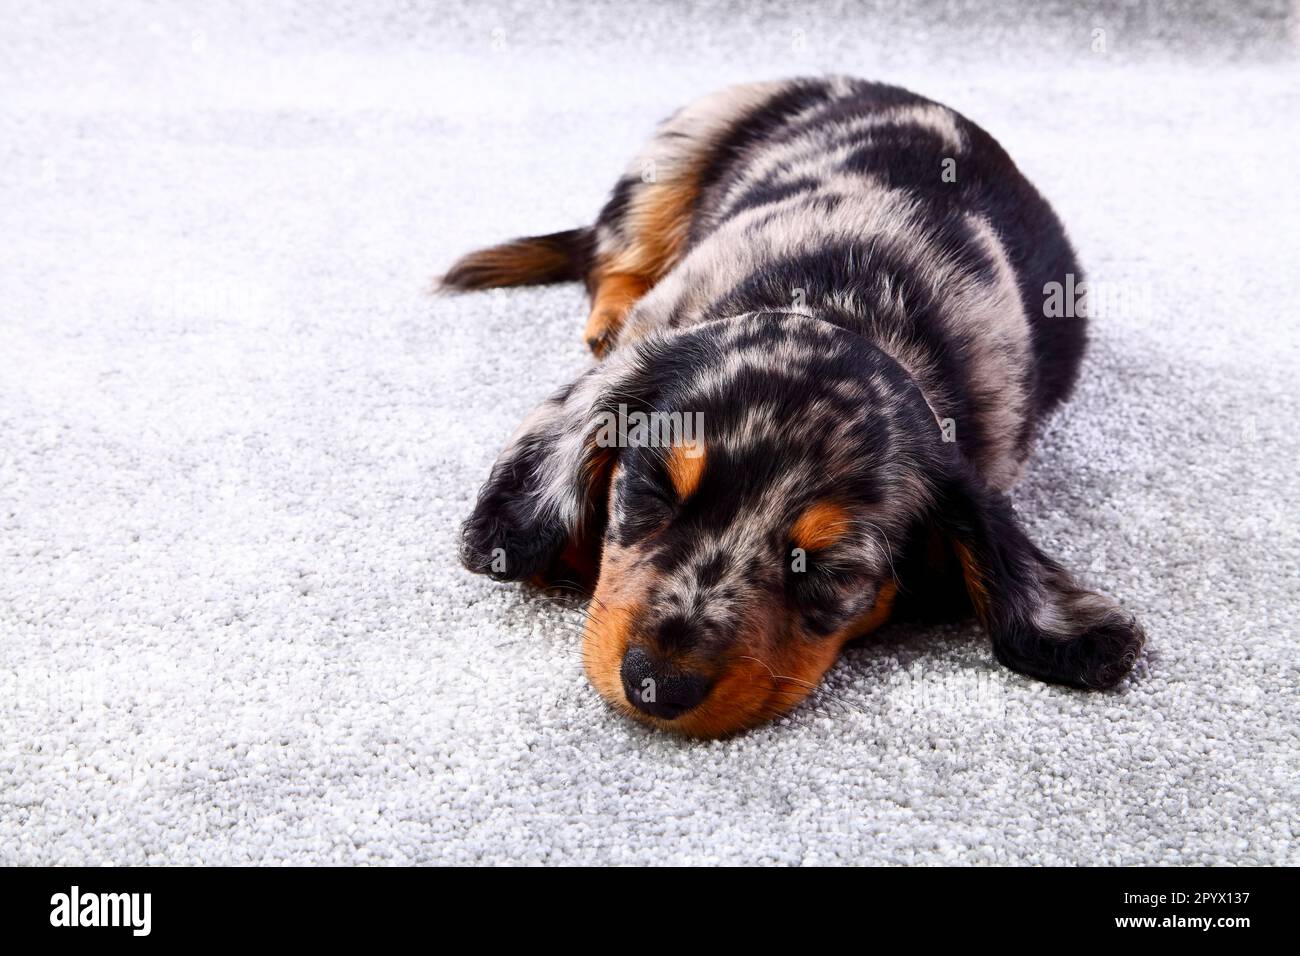 Sleeping dapple dachshund puppy laid on a grey carpet with copy space Stock Photo